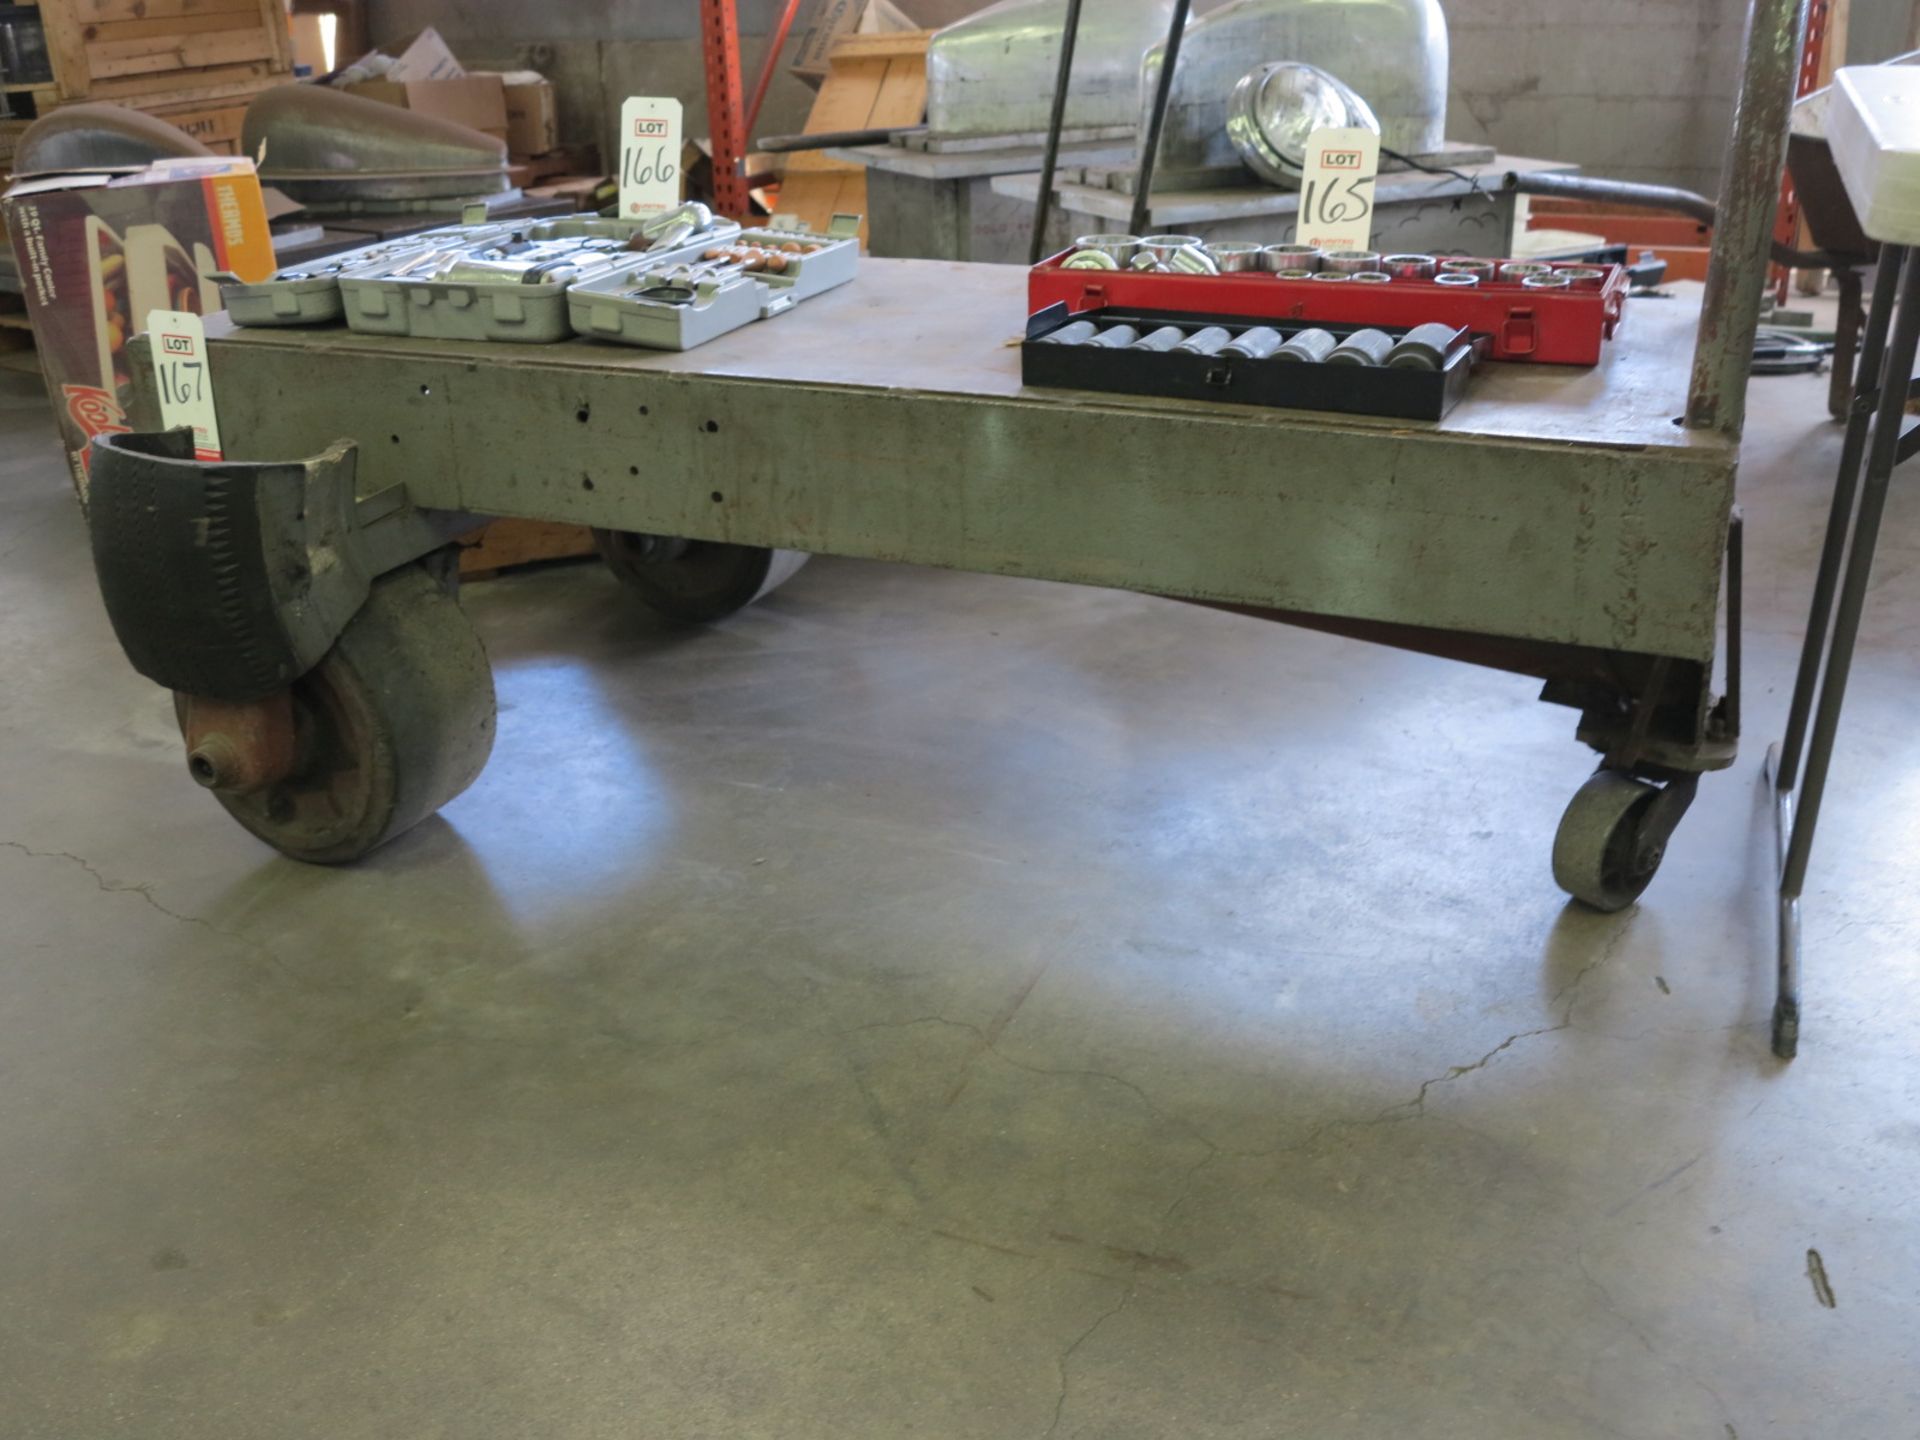 STEEL CART, EXTRA HEAVY DUTY 3-WHEELED CONSTRUCTION, 2' X 5'-3", ITEMS ON TOP NOT INCLUDED - Image 2 of 2